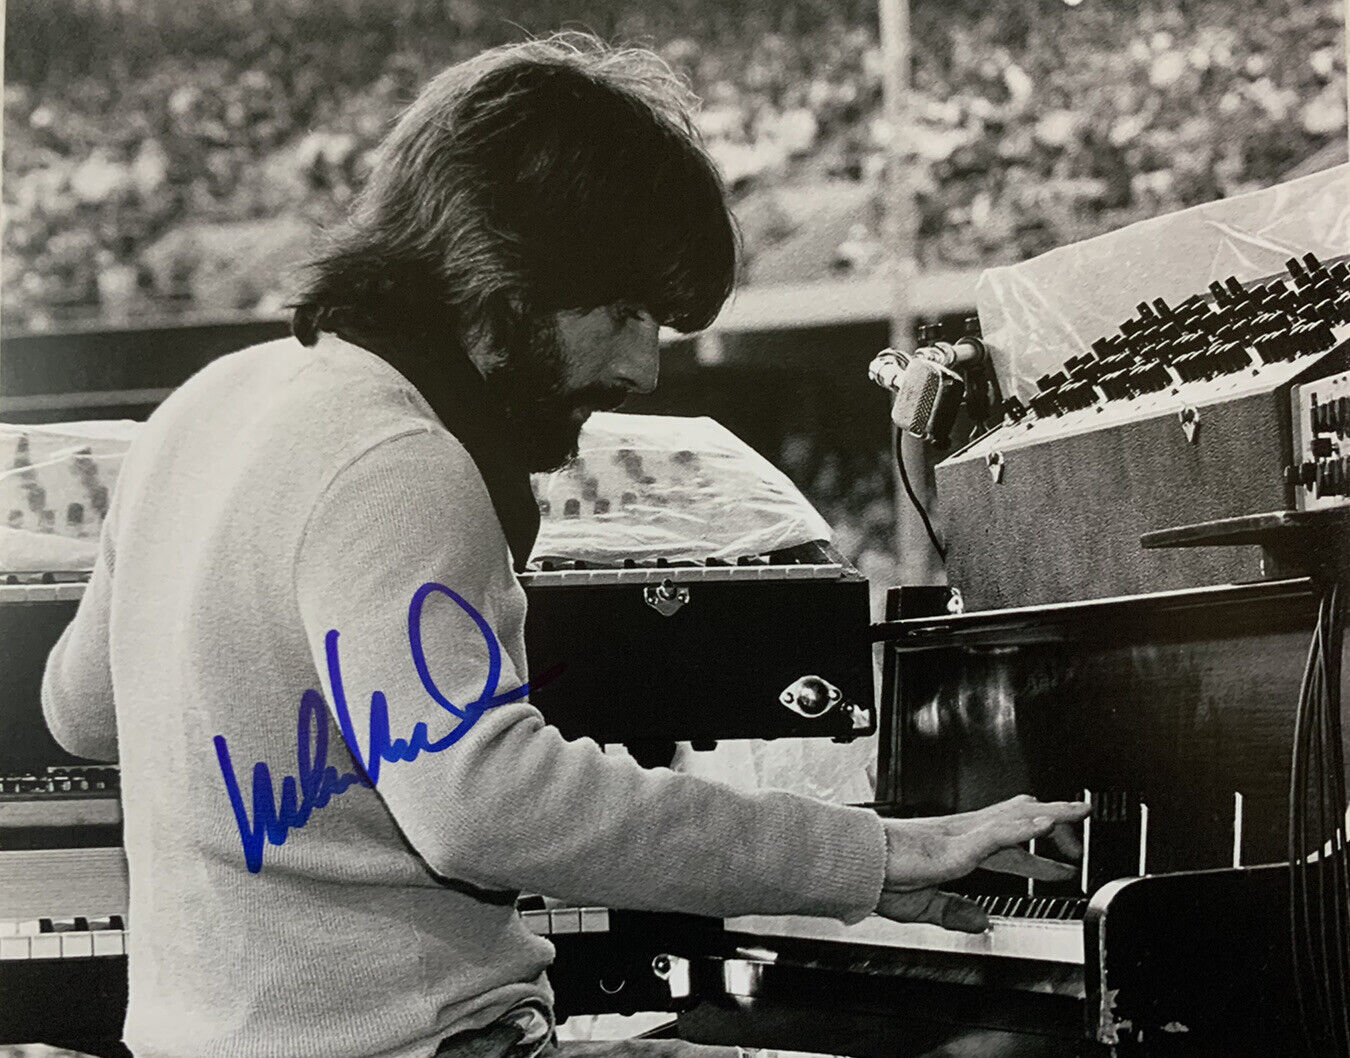 MICHAEL MCDONALD HAND SIGNED 8x10 Photo Poster painting THE DOOBIE BROTHERS AUTOGRAPH COA